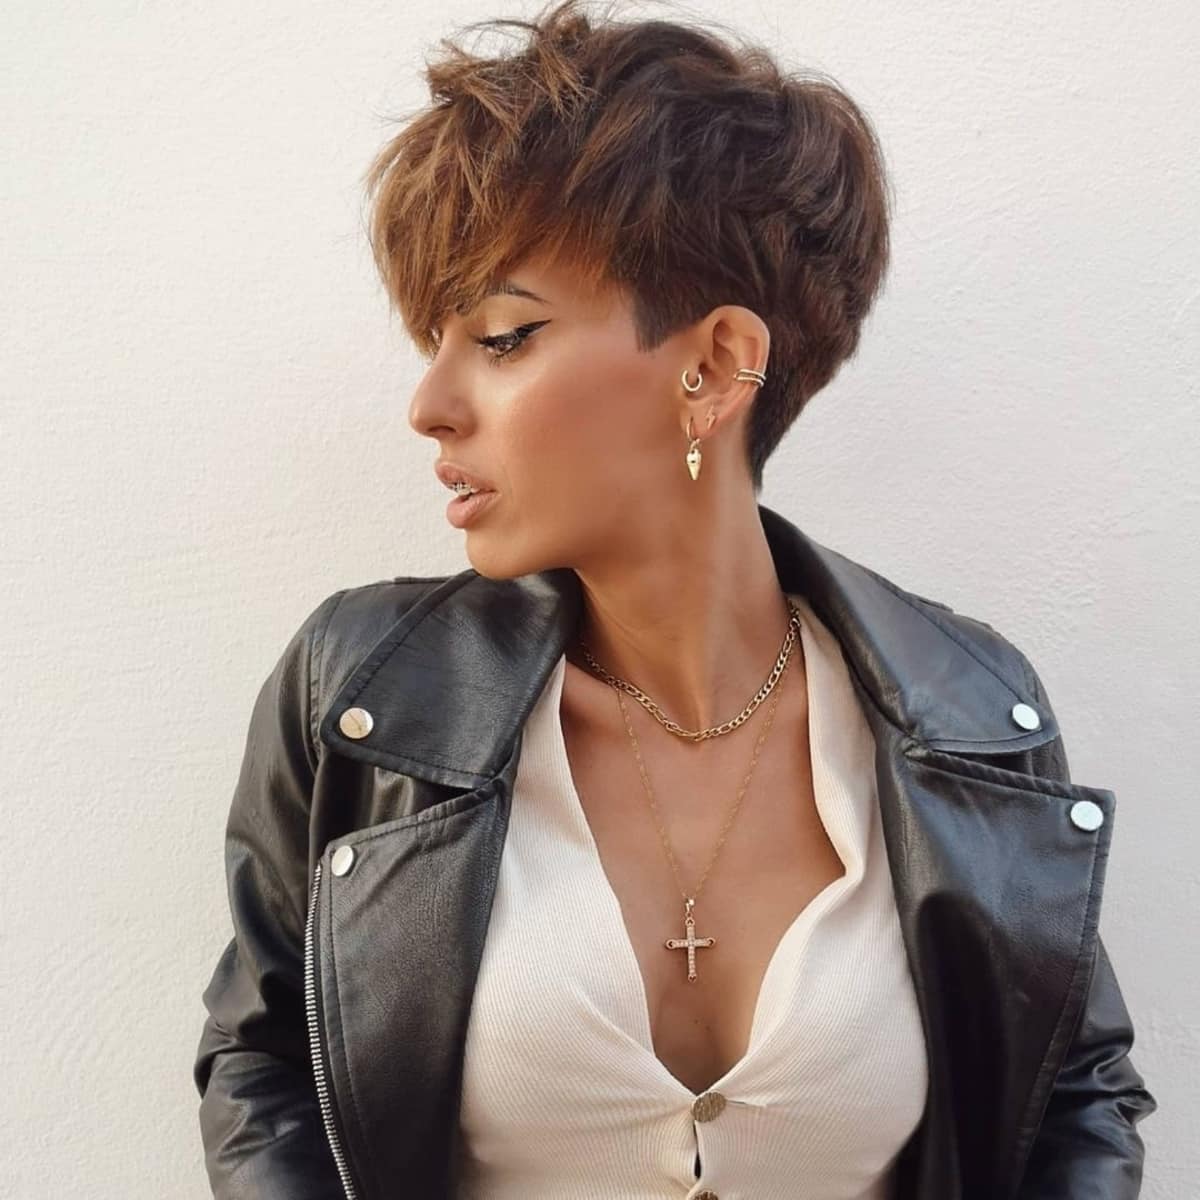 16 Short Hairstyles for Thick Hair | Olixe - Style Magazine For Women